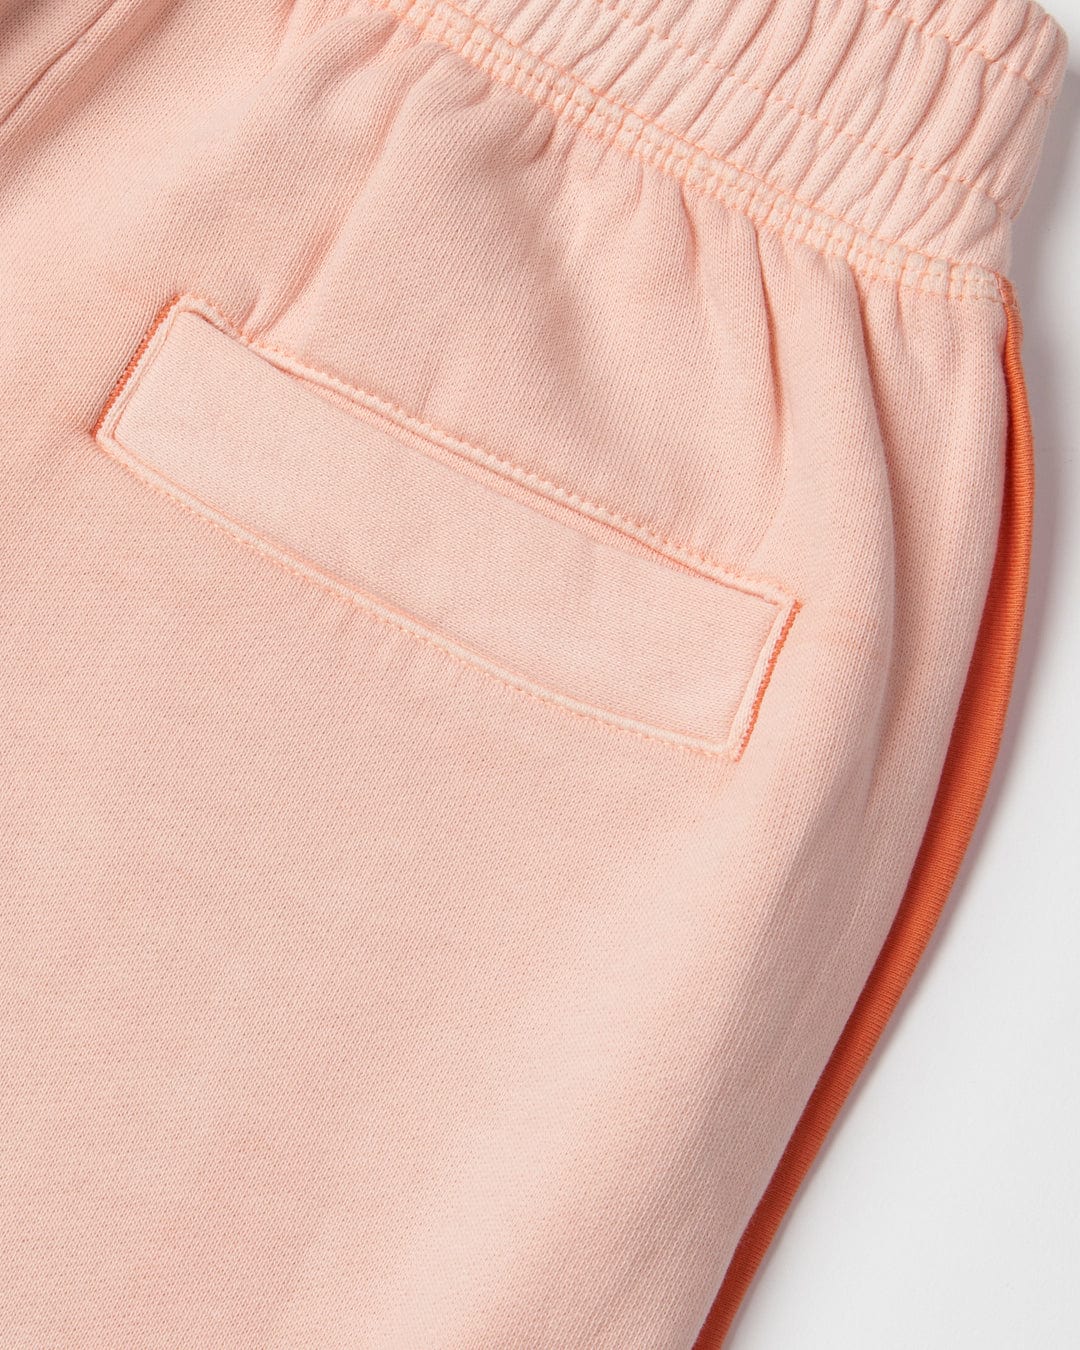 Close-up of a pair of Saltrock Sunshine State - Kids Joggers - Peach with an elasticated waistband and a stitched pocket, showcasing their 100% cotton fabric for a soft hand feel. Another pair of orange pants is partially visible underneath.